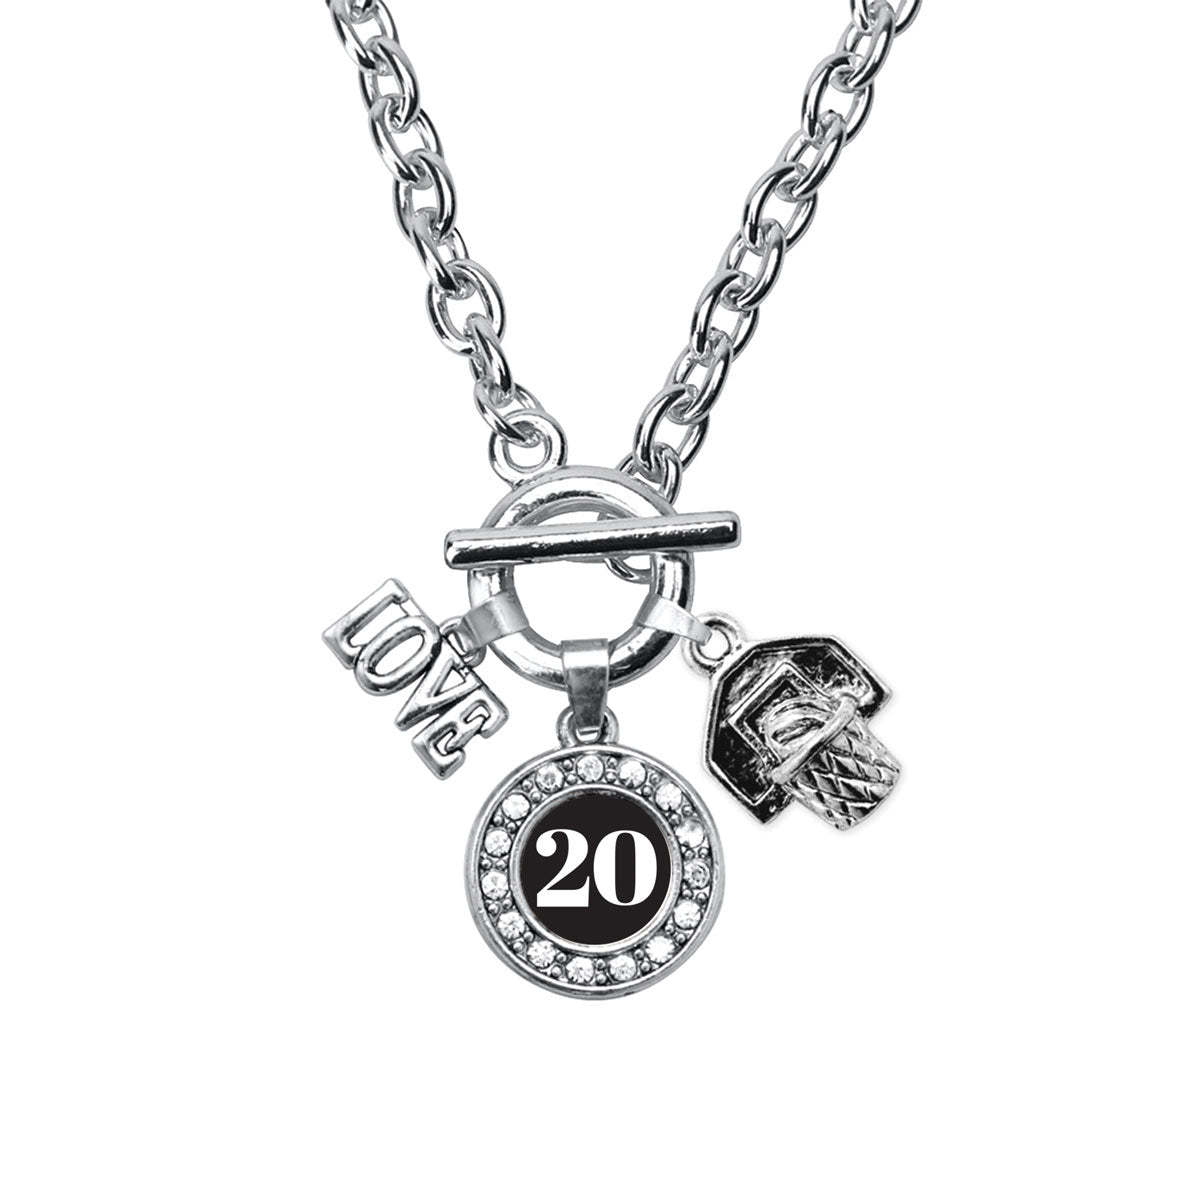 Silver Basketball Hoop - Sports Number 20 Circle Charm Toggle Necklace